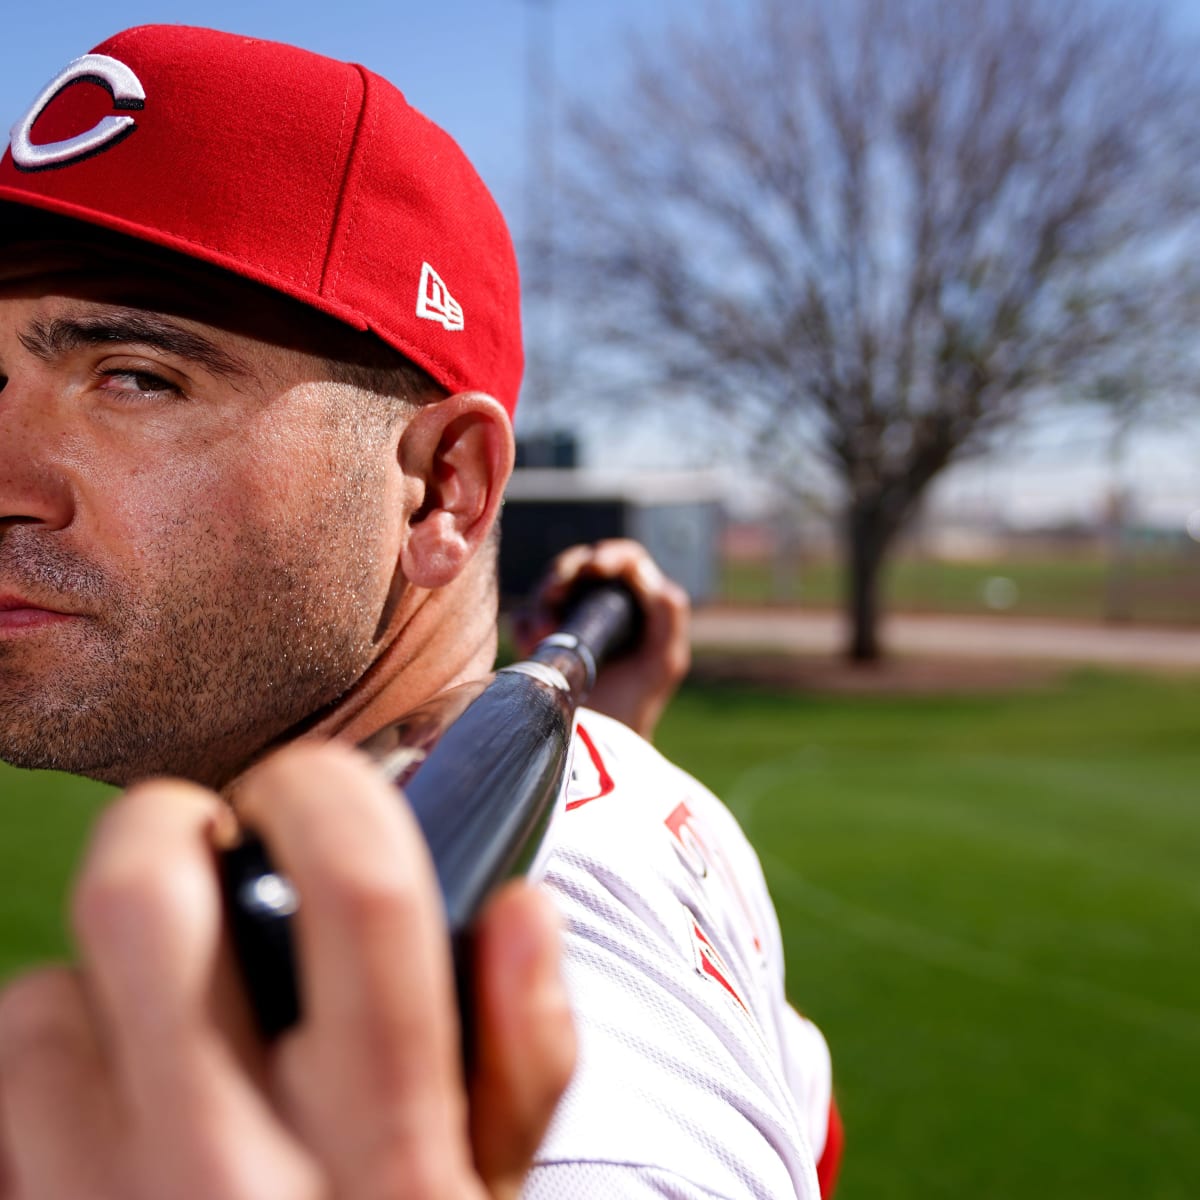 Joey Votto's TikTok is officially the best thing on the internet